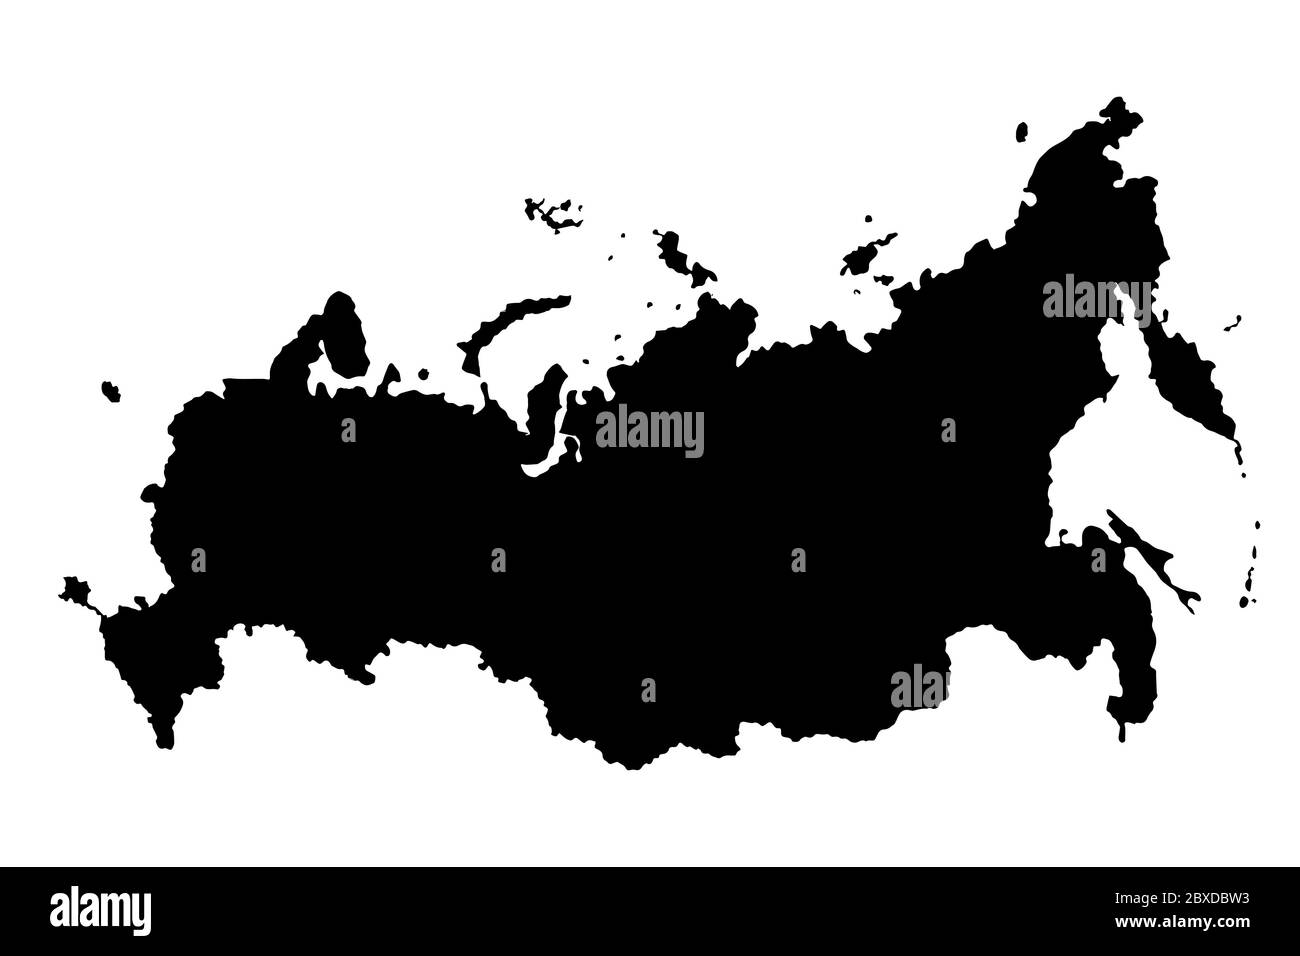 Russia  map with gray tone on  white background,illustration,textured , Symbols of Russia,vector illustration Stock Vector